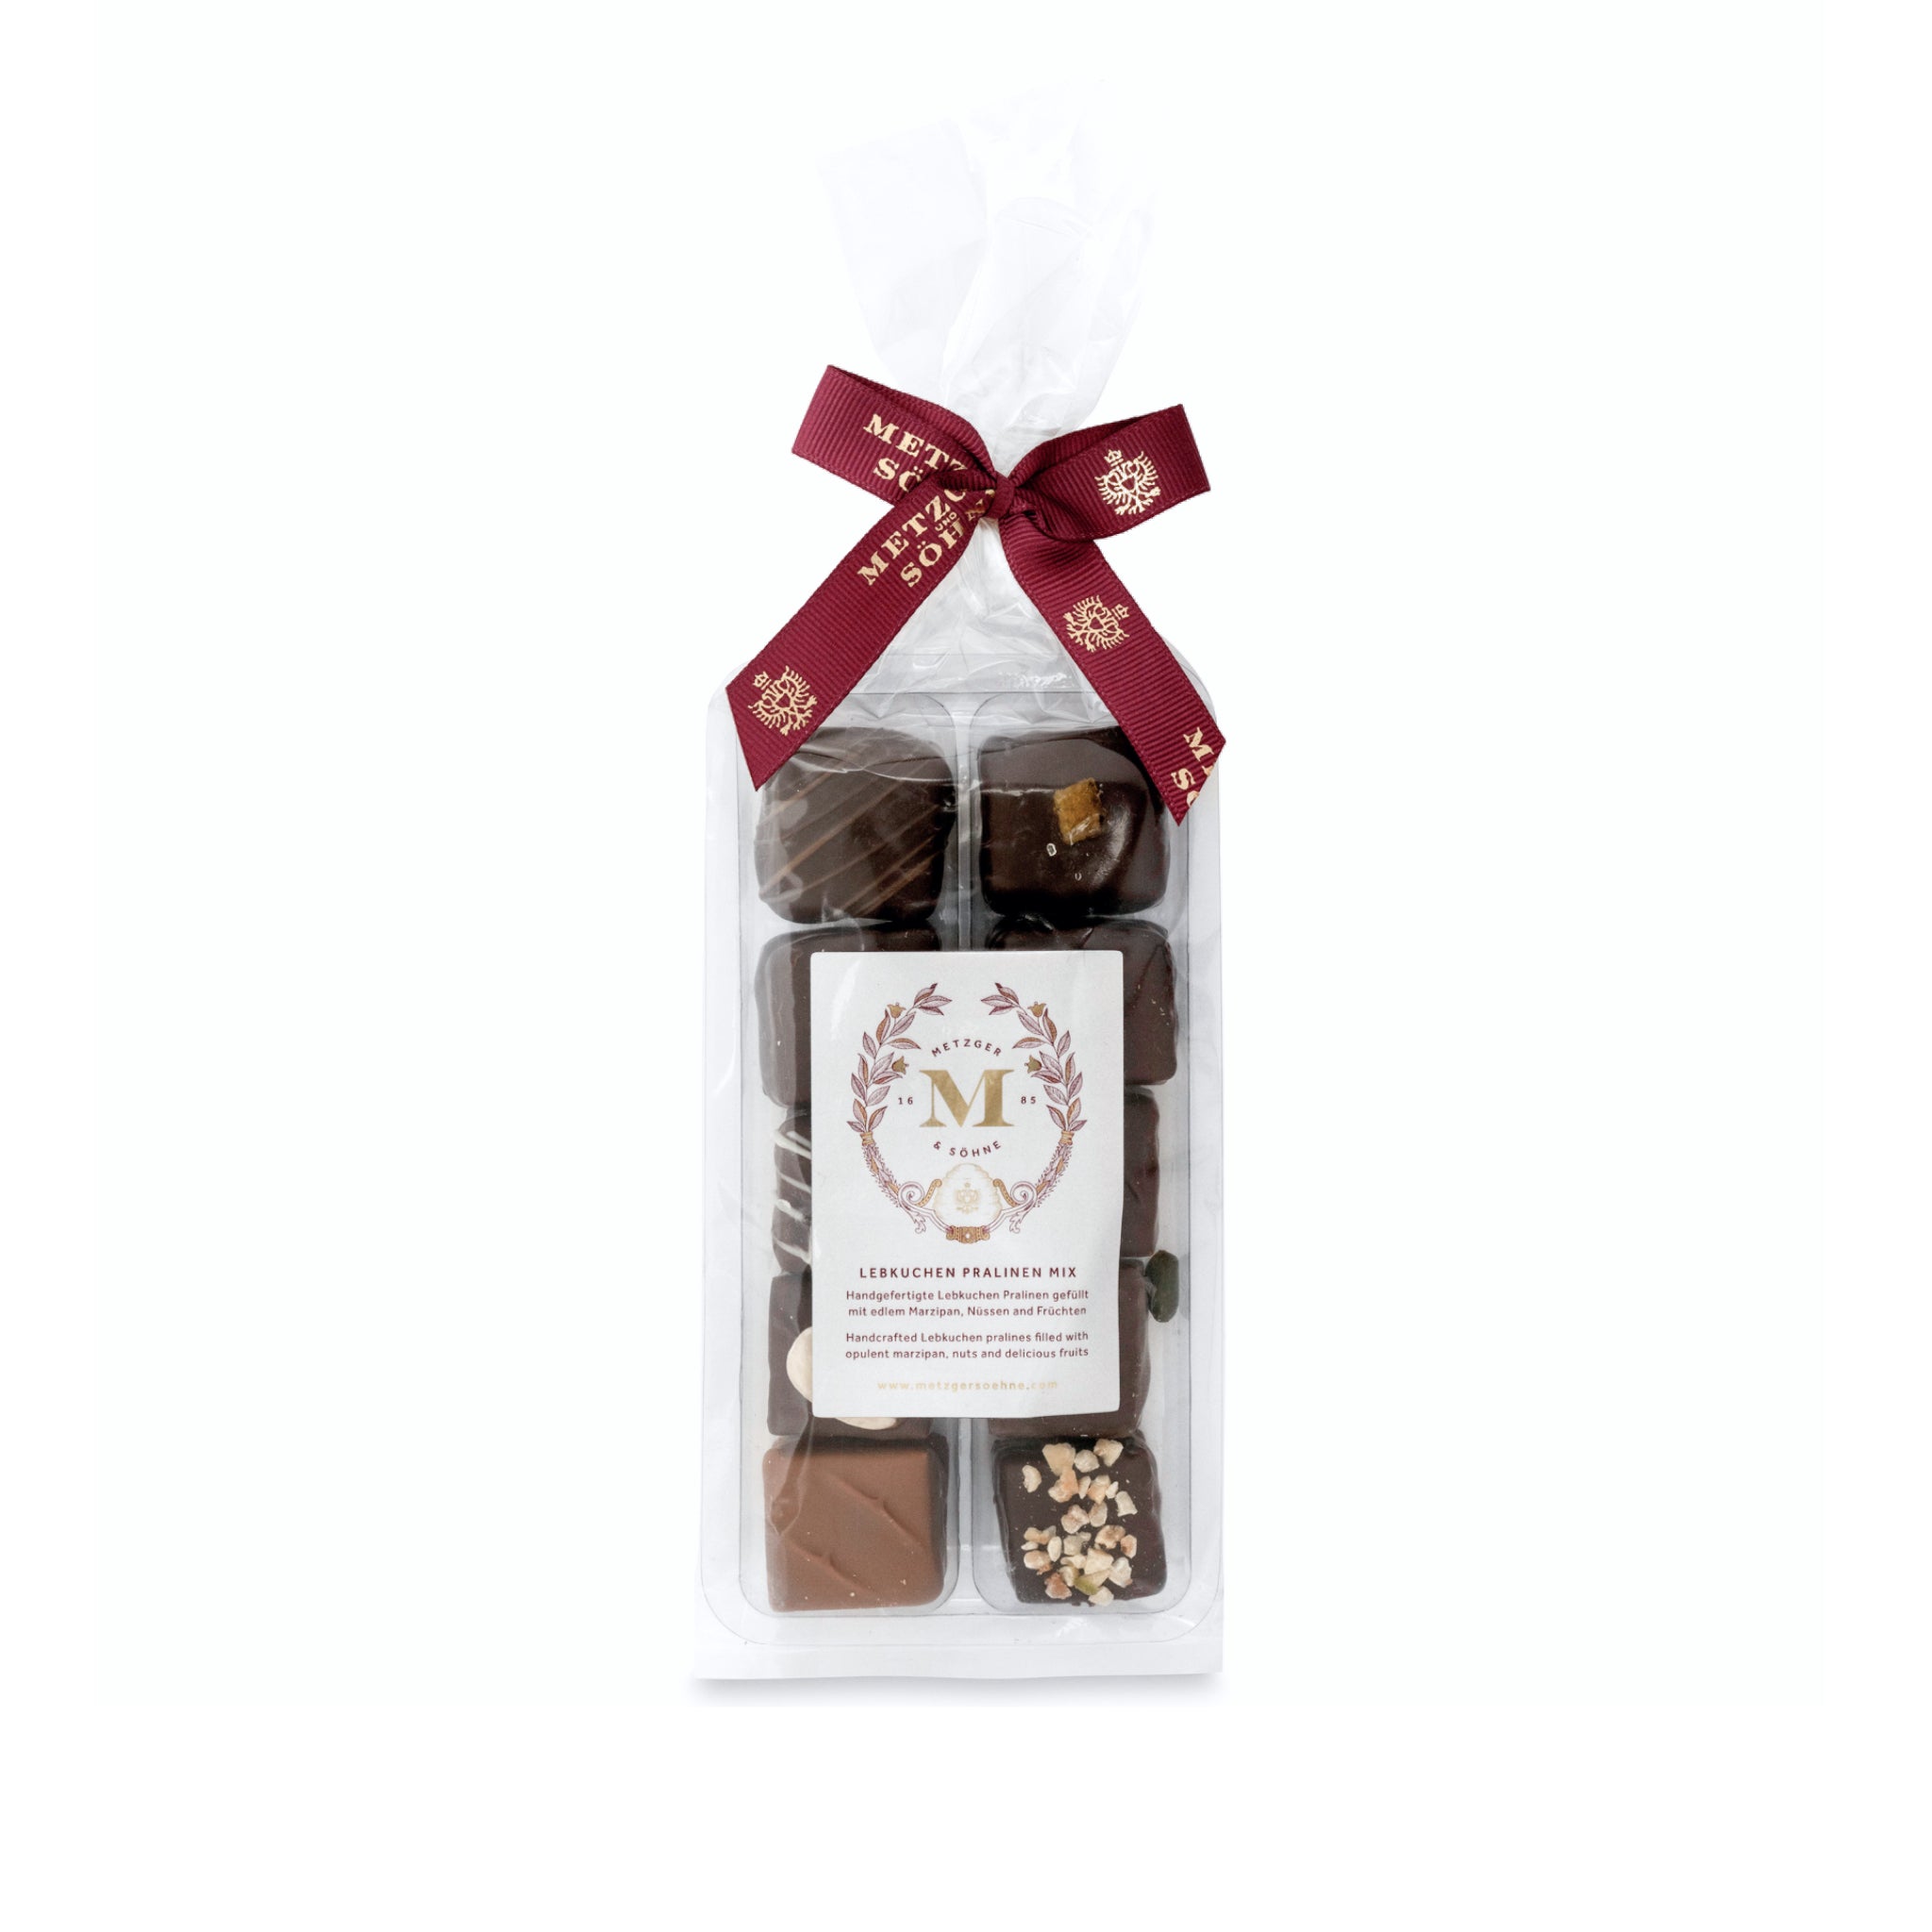 A delicious treat or taster for cookie and chocolate lovers: 10 delectable Lebkuchen chocolate pralines: marzipan, pistachio marzipan, orange marzipan, hazelnut marzipan & rum, marzipan and currant jelly, currant jelly, aranzini, hazelnut and raisin, pistachio marzipan and nougat, poppy seed and plum. Suitable for vegetarians.